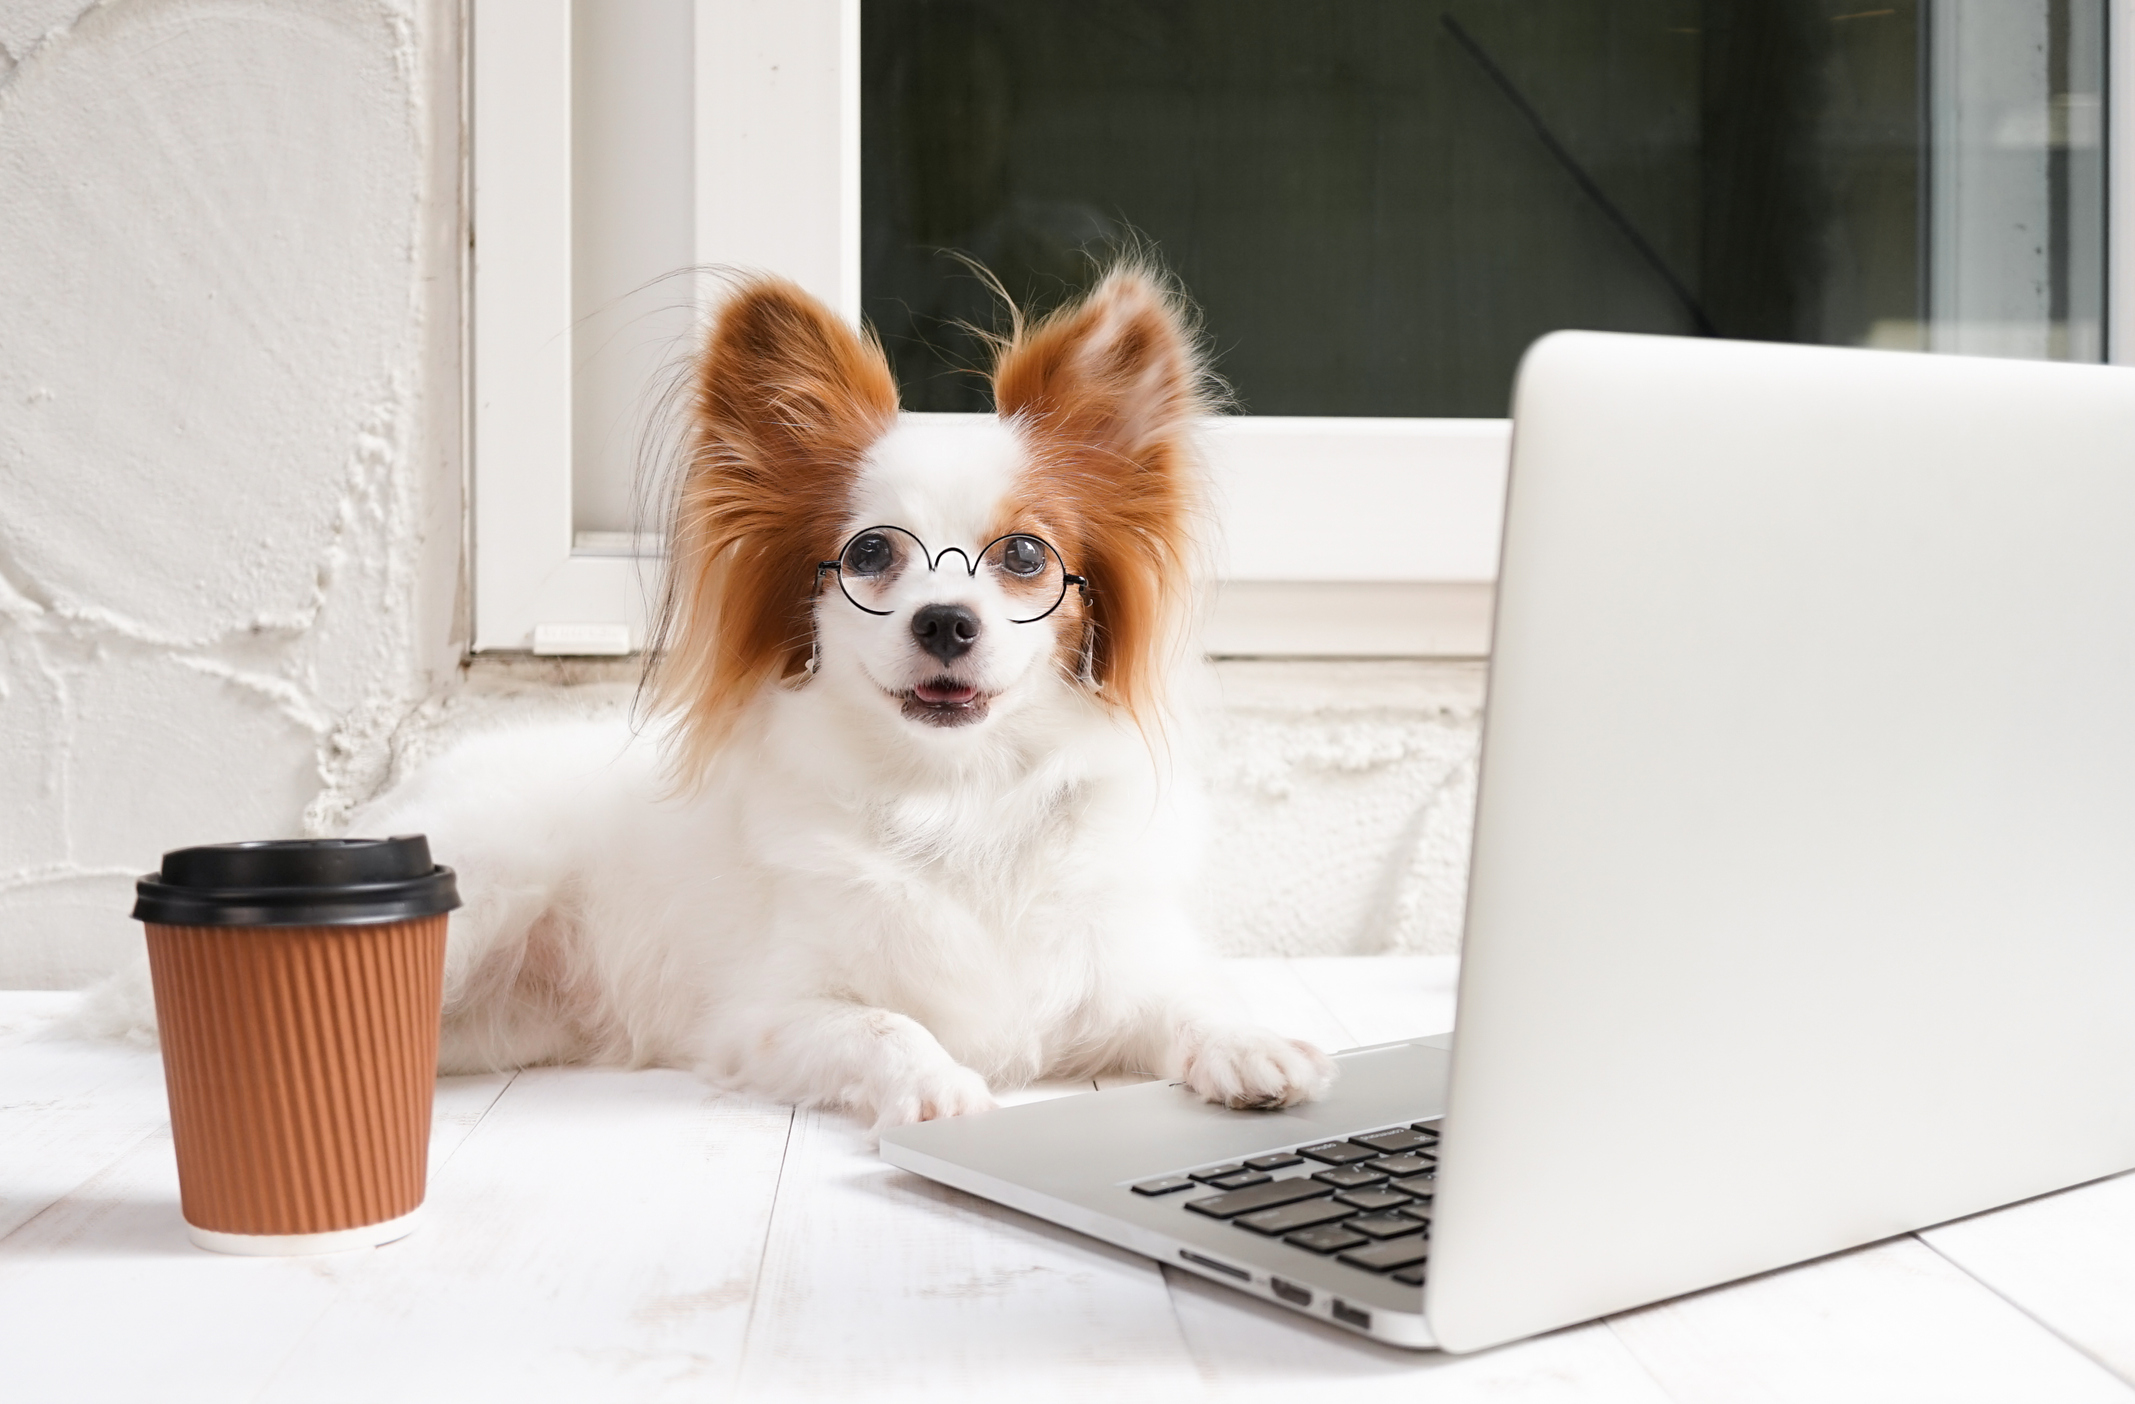 Papillon dog wearing glasses poses with a laptop and a cup of coffee for Social Petworking Month